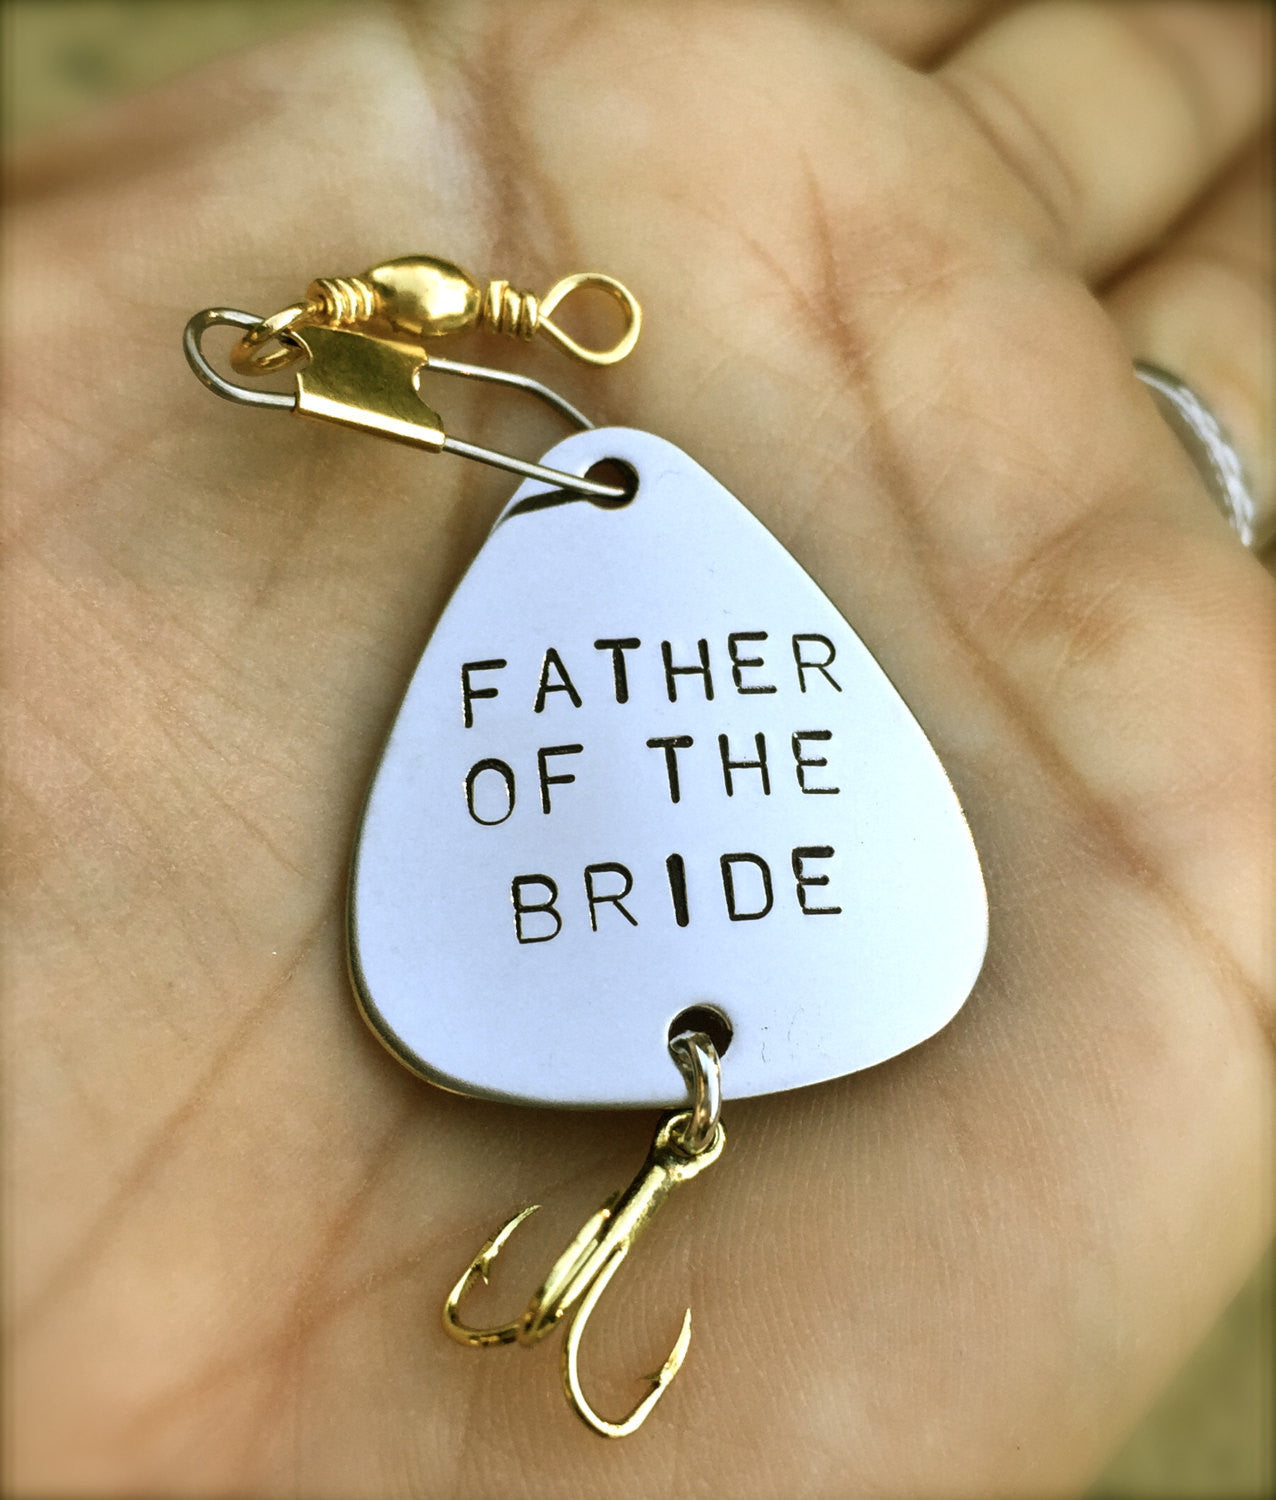 Fishing Lures,Father Of the Bride Fishing Lure, Valentine Gift, Forever Your Little Girl, My Reel True Love, Groomsmen Gifts, Wedding Favors - Natashaaloha, jewelry, bracelets, necklace, keychains, fishing lures, gifts for men, charms, personalized, 